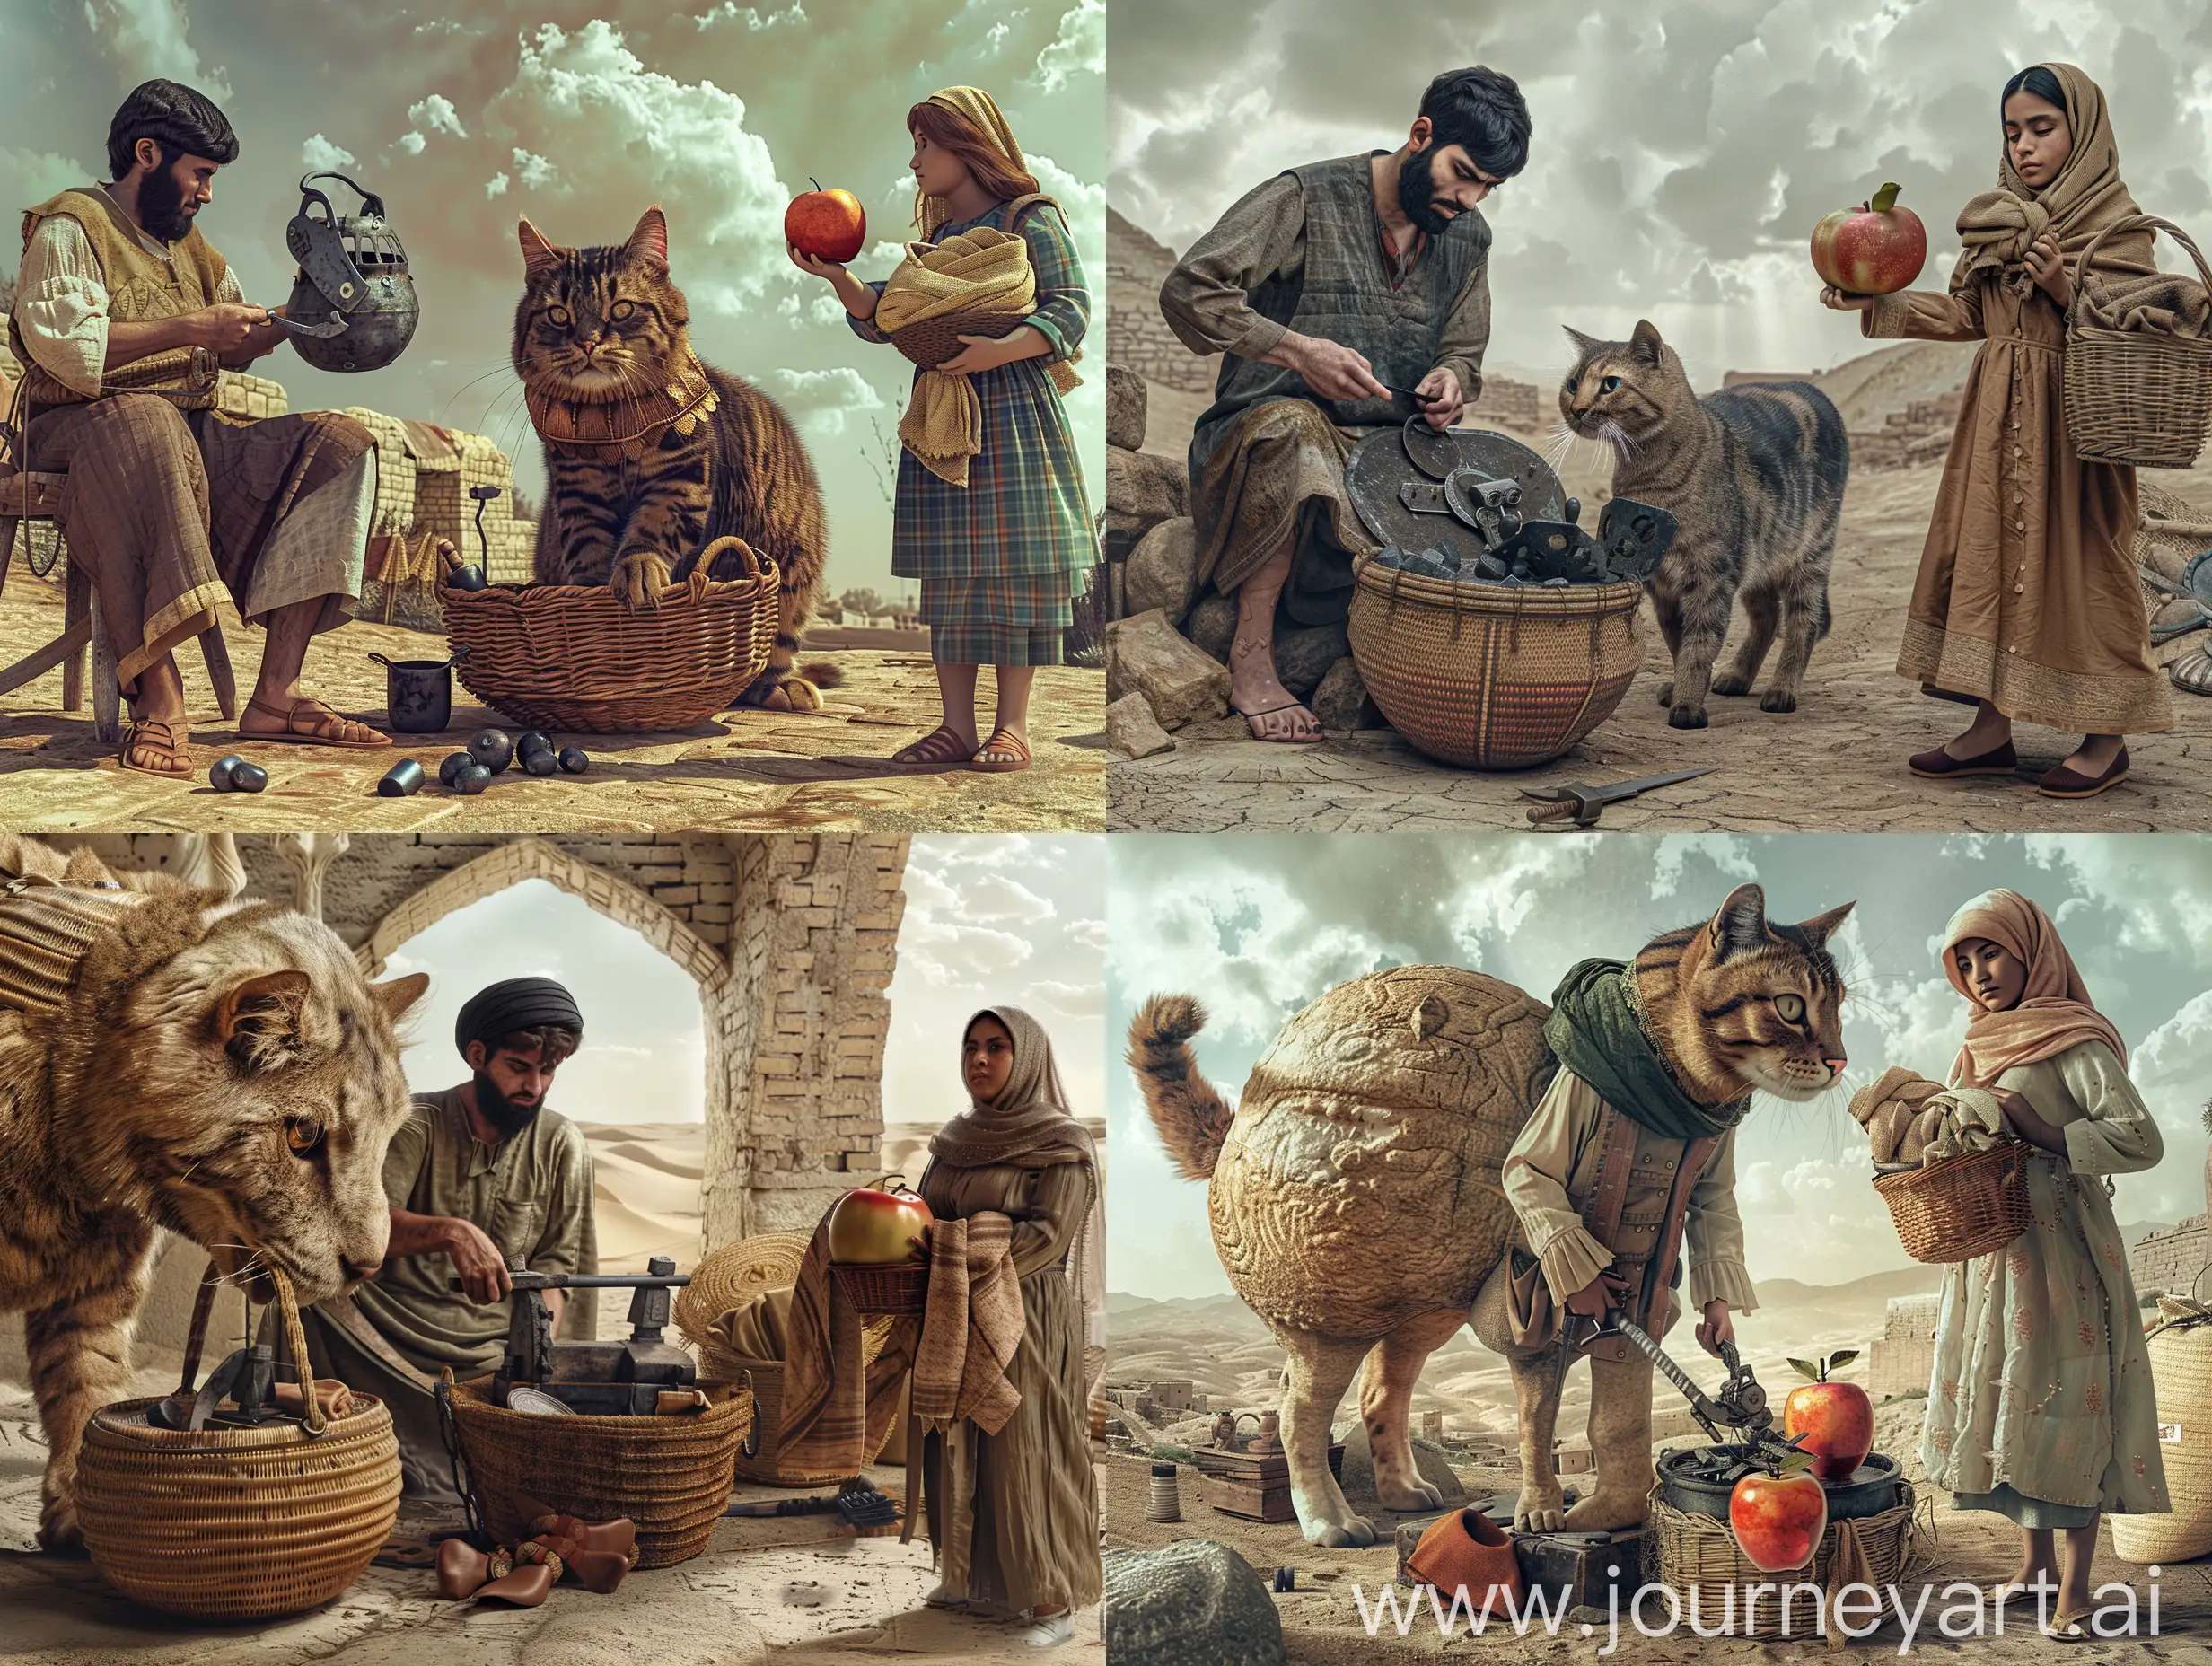 Ancient-Persian-Blacksmith-Crafting-Iron-Armor-for-Giant-Cat-Amidst-Desert-City